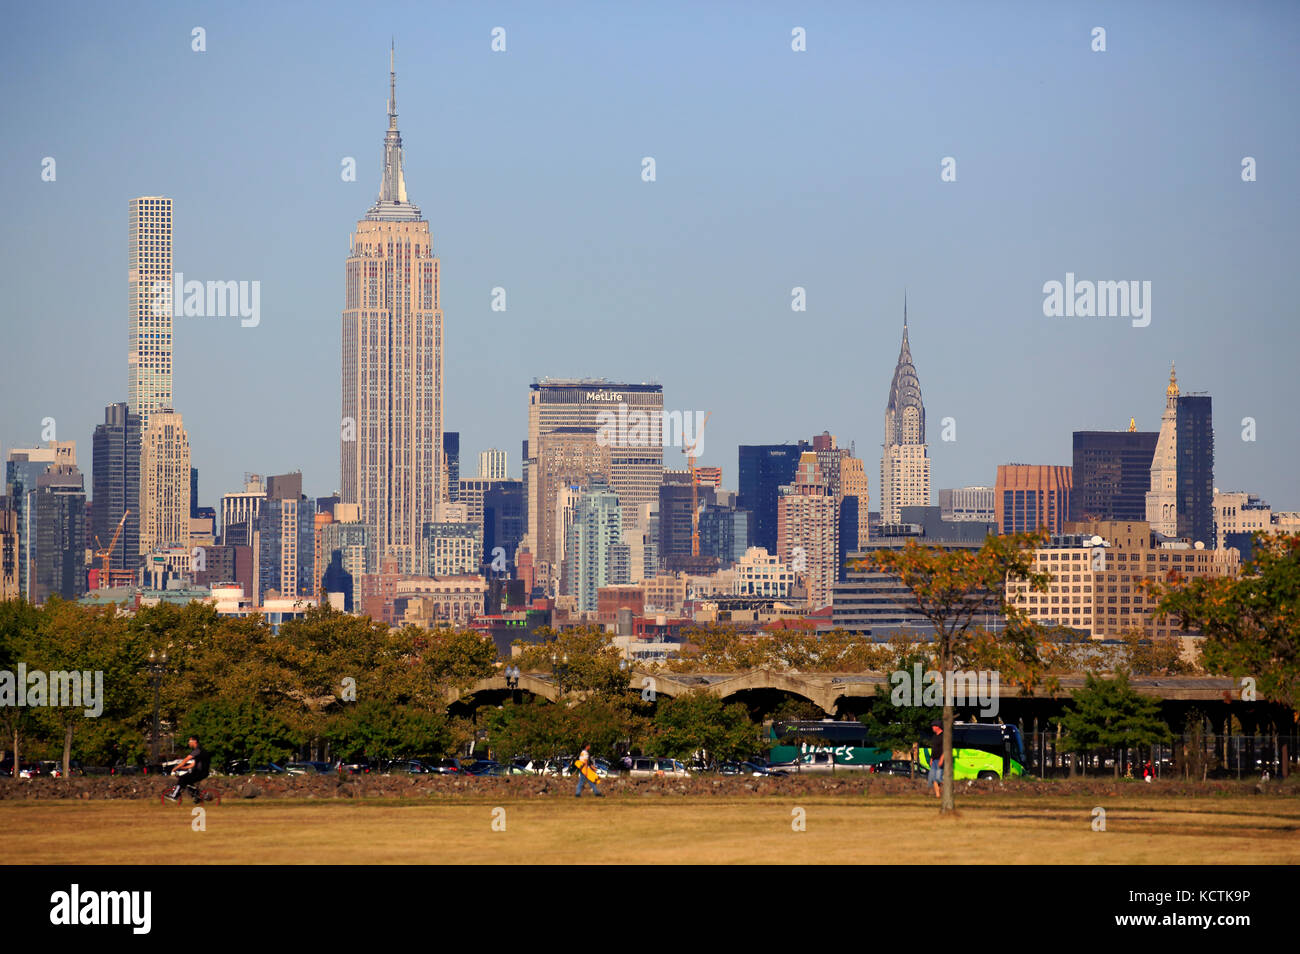 View of midtown Manhattan with 432 Park Ave Tower, Empire State Building, Chrysler Building from Liberty State Park in New Jersey.USA Stock Photo